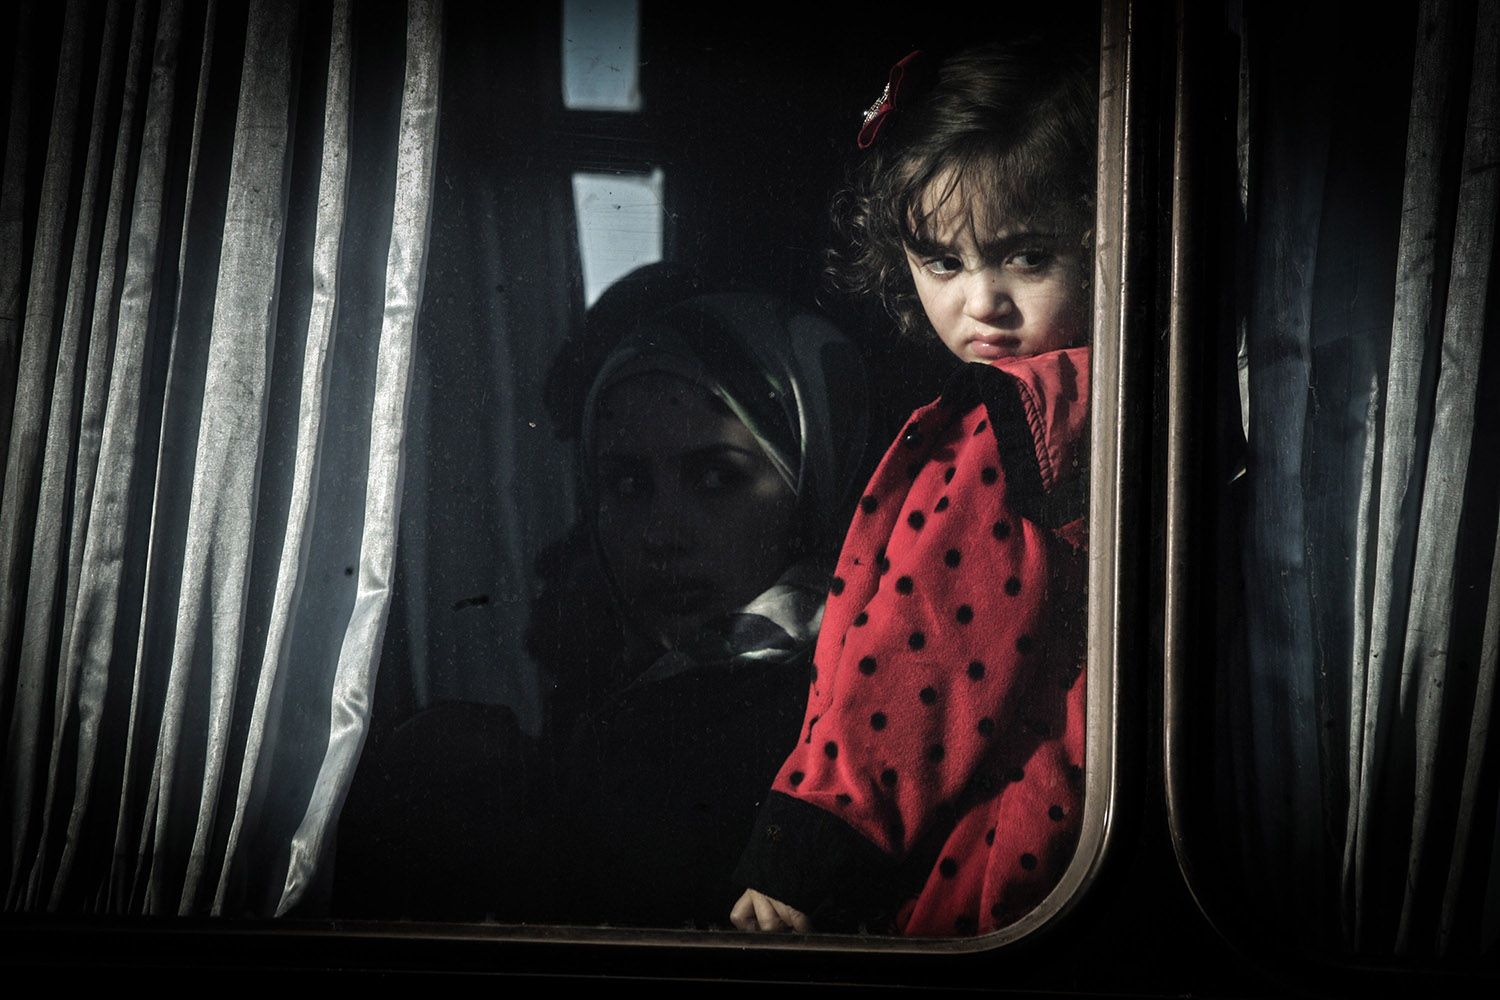 Jan. 21, 2014. A Palestinian girl looks out a bus window as she waits with her family, hoping to cross into Egypt, at the Rafah crossing between Egypt and the southern Gaza Strip.